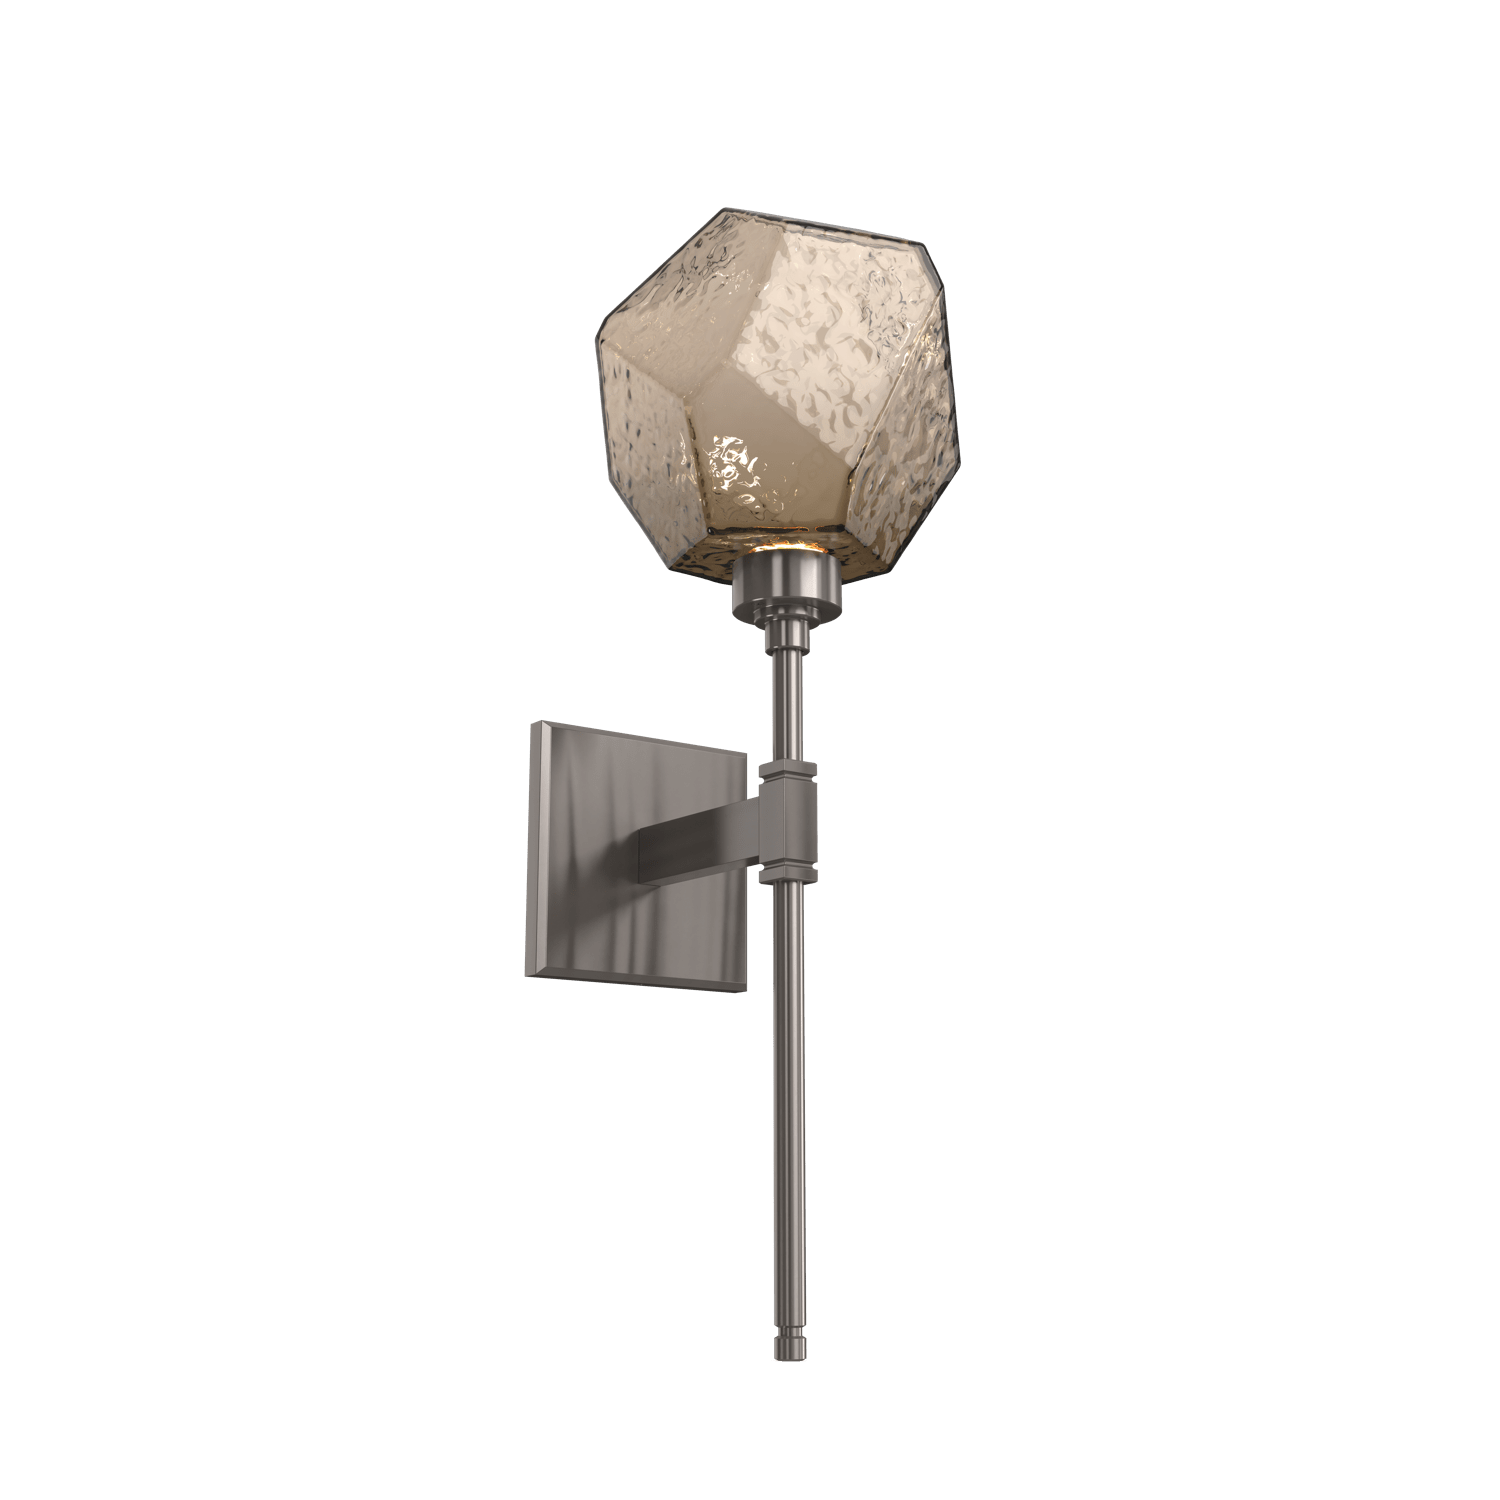 IDB0039-08-GM-B-Hammerton-Studio-Gem-belvedere-wall-sconce-with-gunmetal-finish-and-bronze-blown-glass-shades-and-LED-lamping